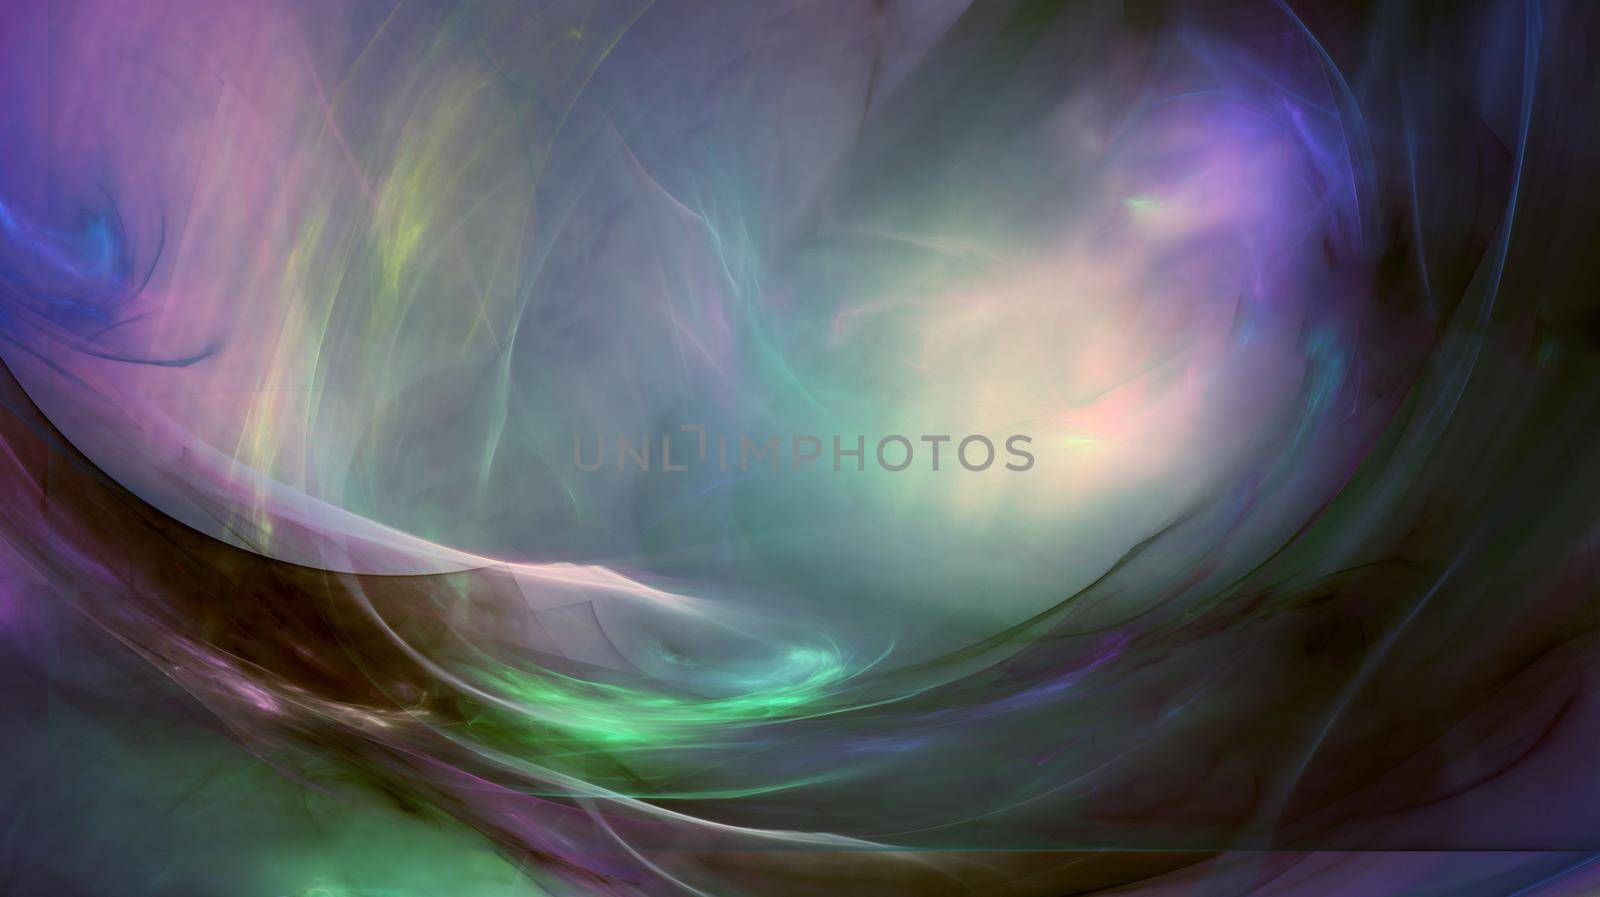 Abstract background image in the form of various elements in pastel colors